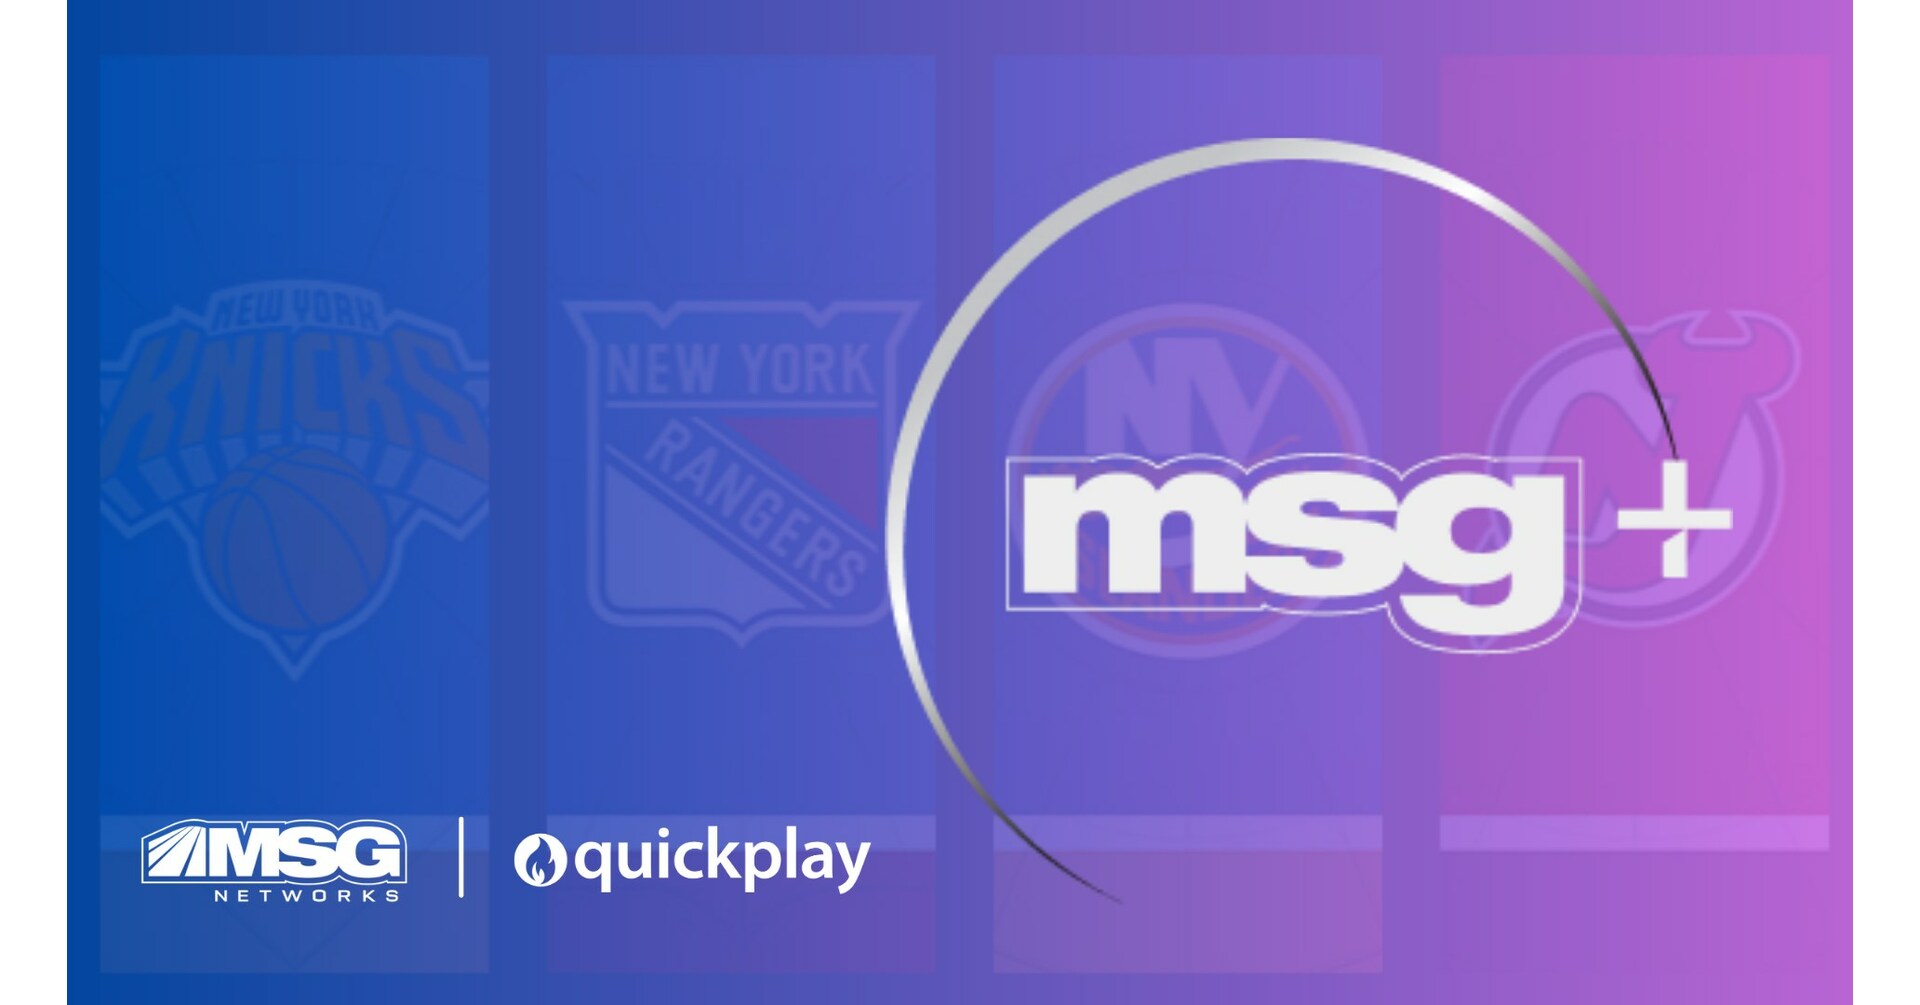 MSGNetworks.com - Official Site of MSG Networks